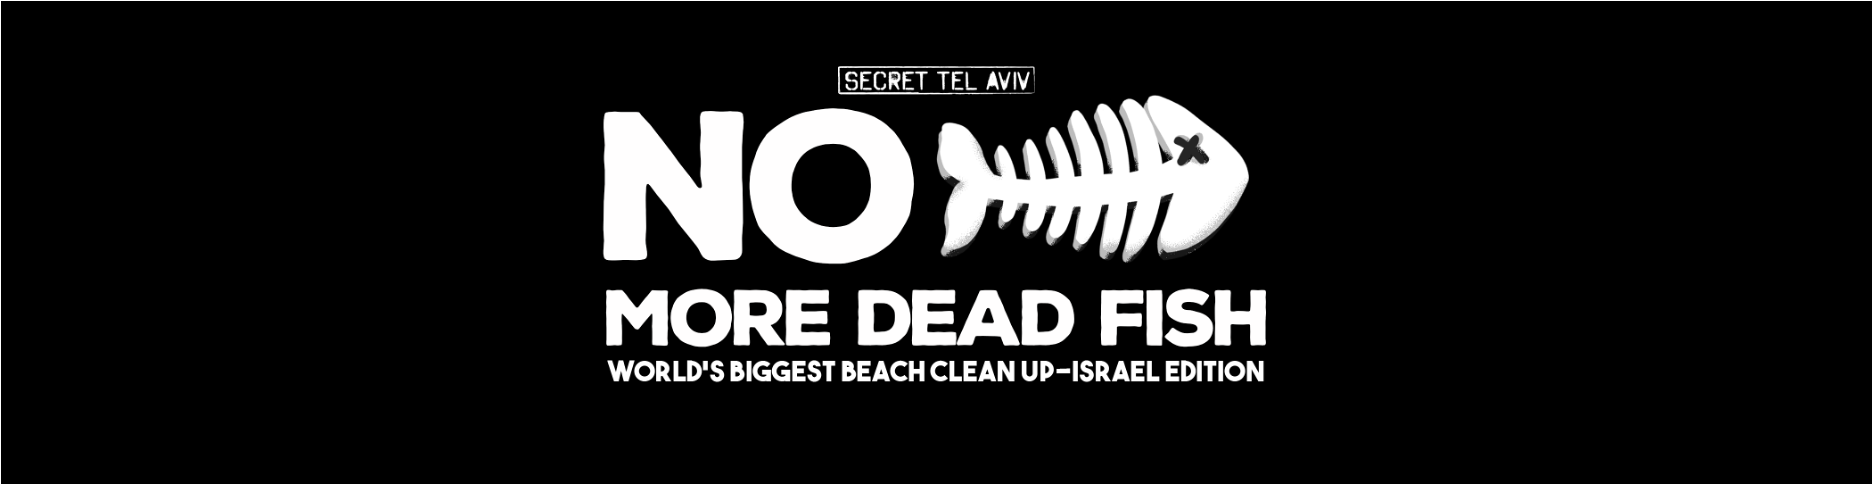 World's Biggest Beach Cleanup - Israel Edition